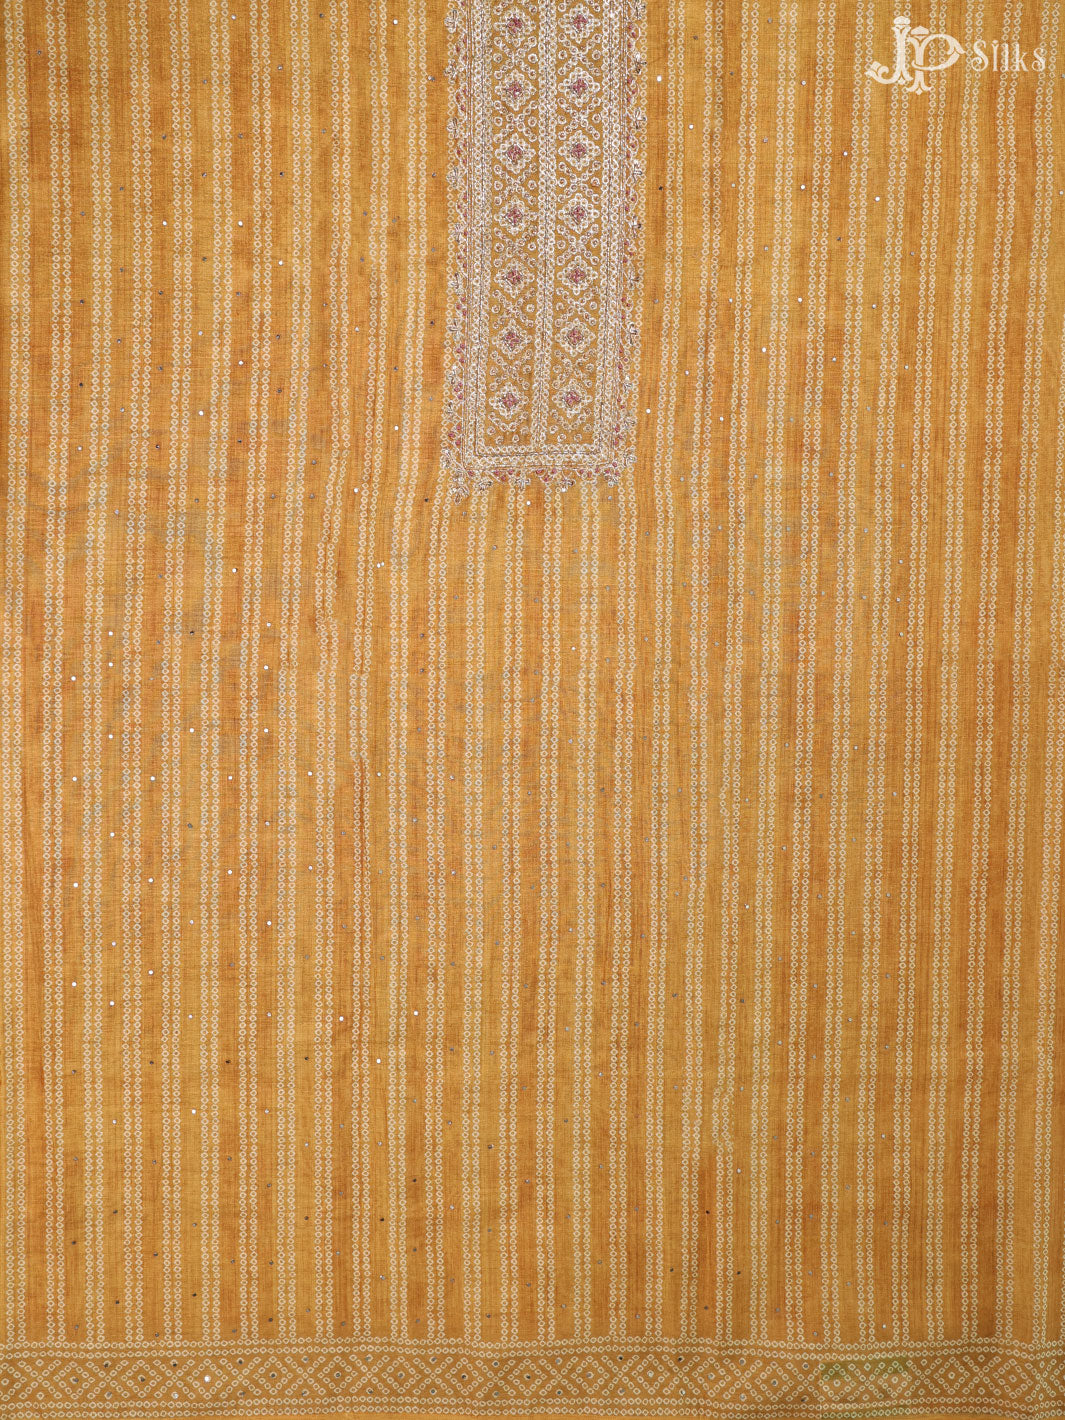 Yellow Tussar Unstiched Chudidhar Material - E1464 - View 5